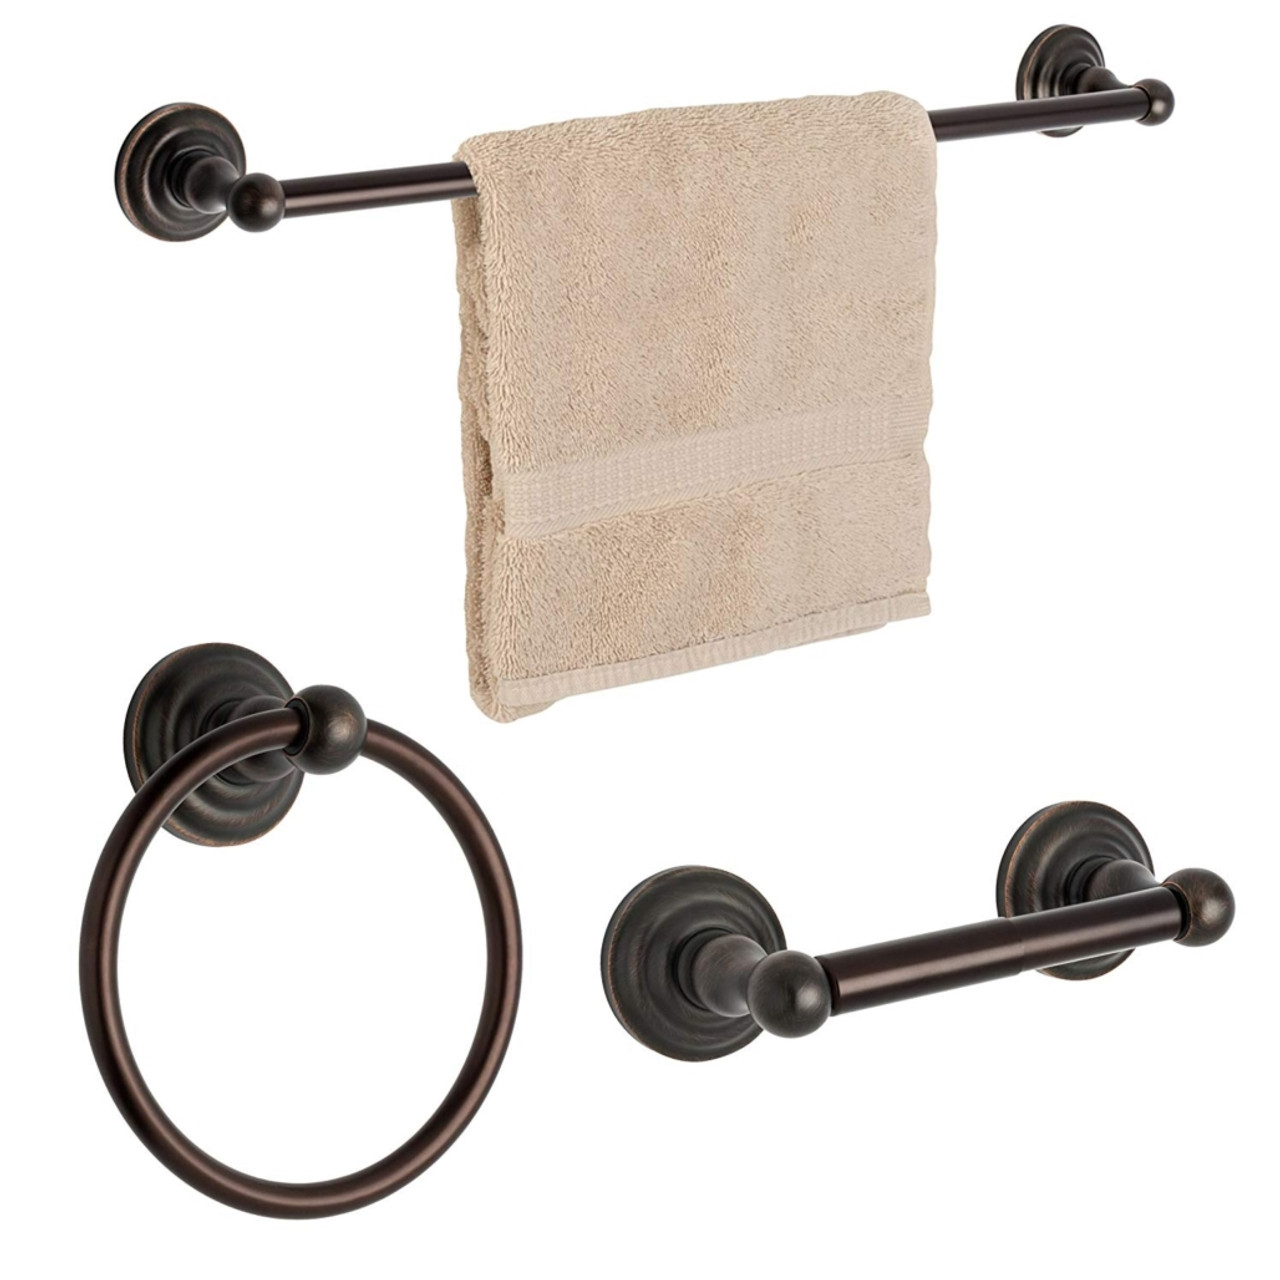 Dynasty Hardware 3800-ORB-3 Palisades Series Bathroom Hardware Set, Oil Rubbed Bronze, 3-Piece Set, with 24" Towel Bar